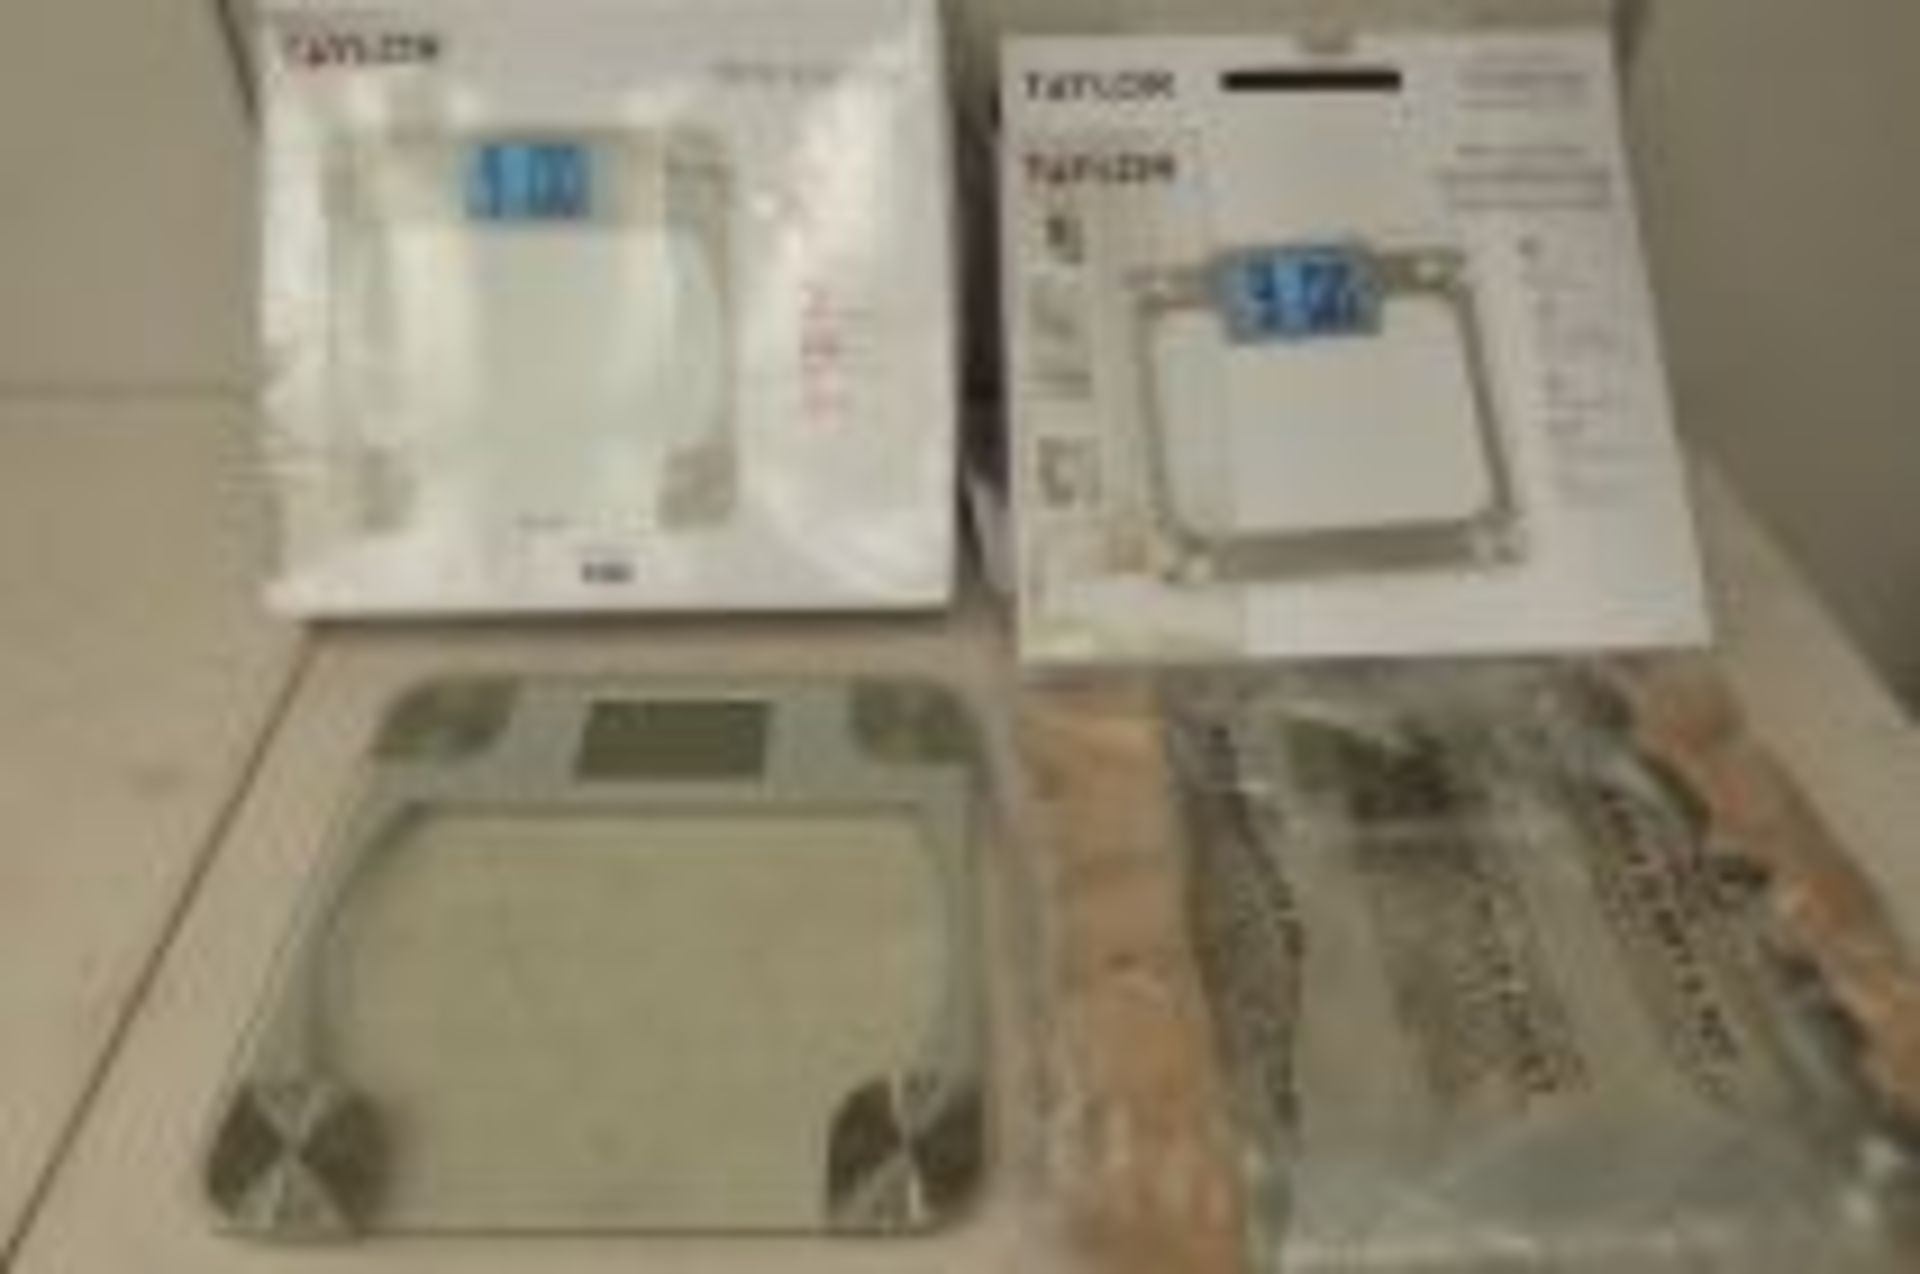 2 boxed Taylor digital glass scales